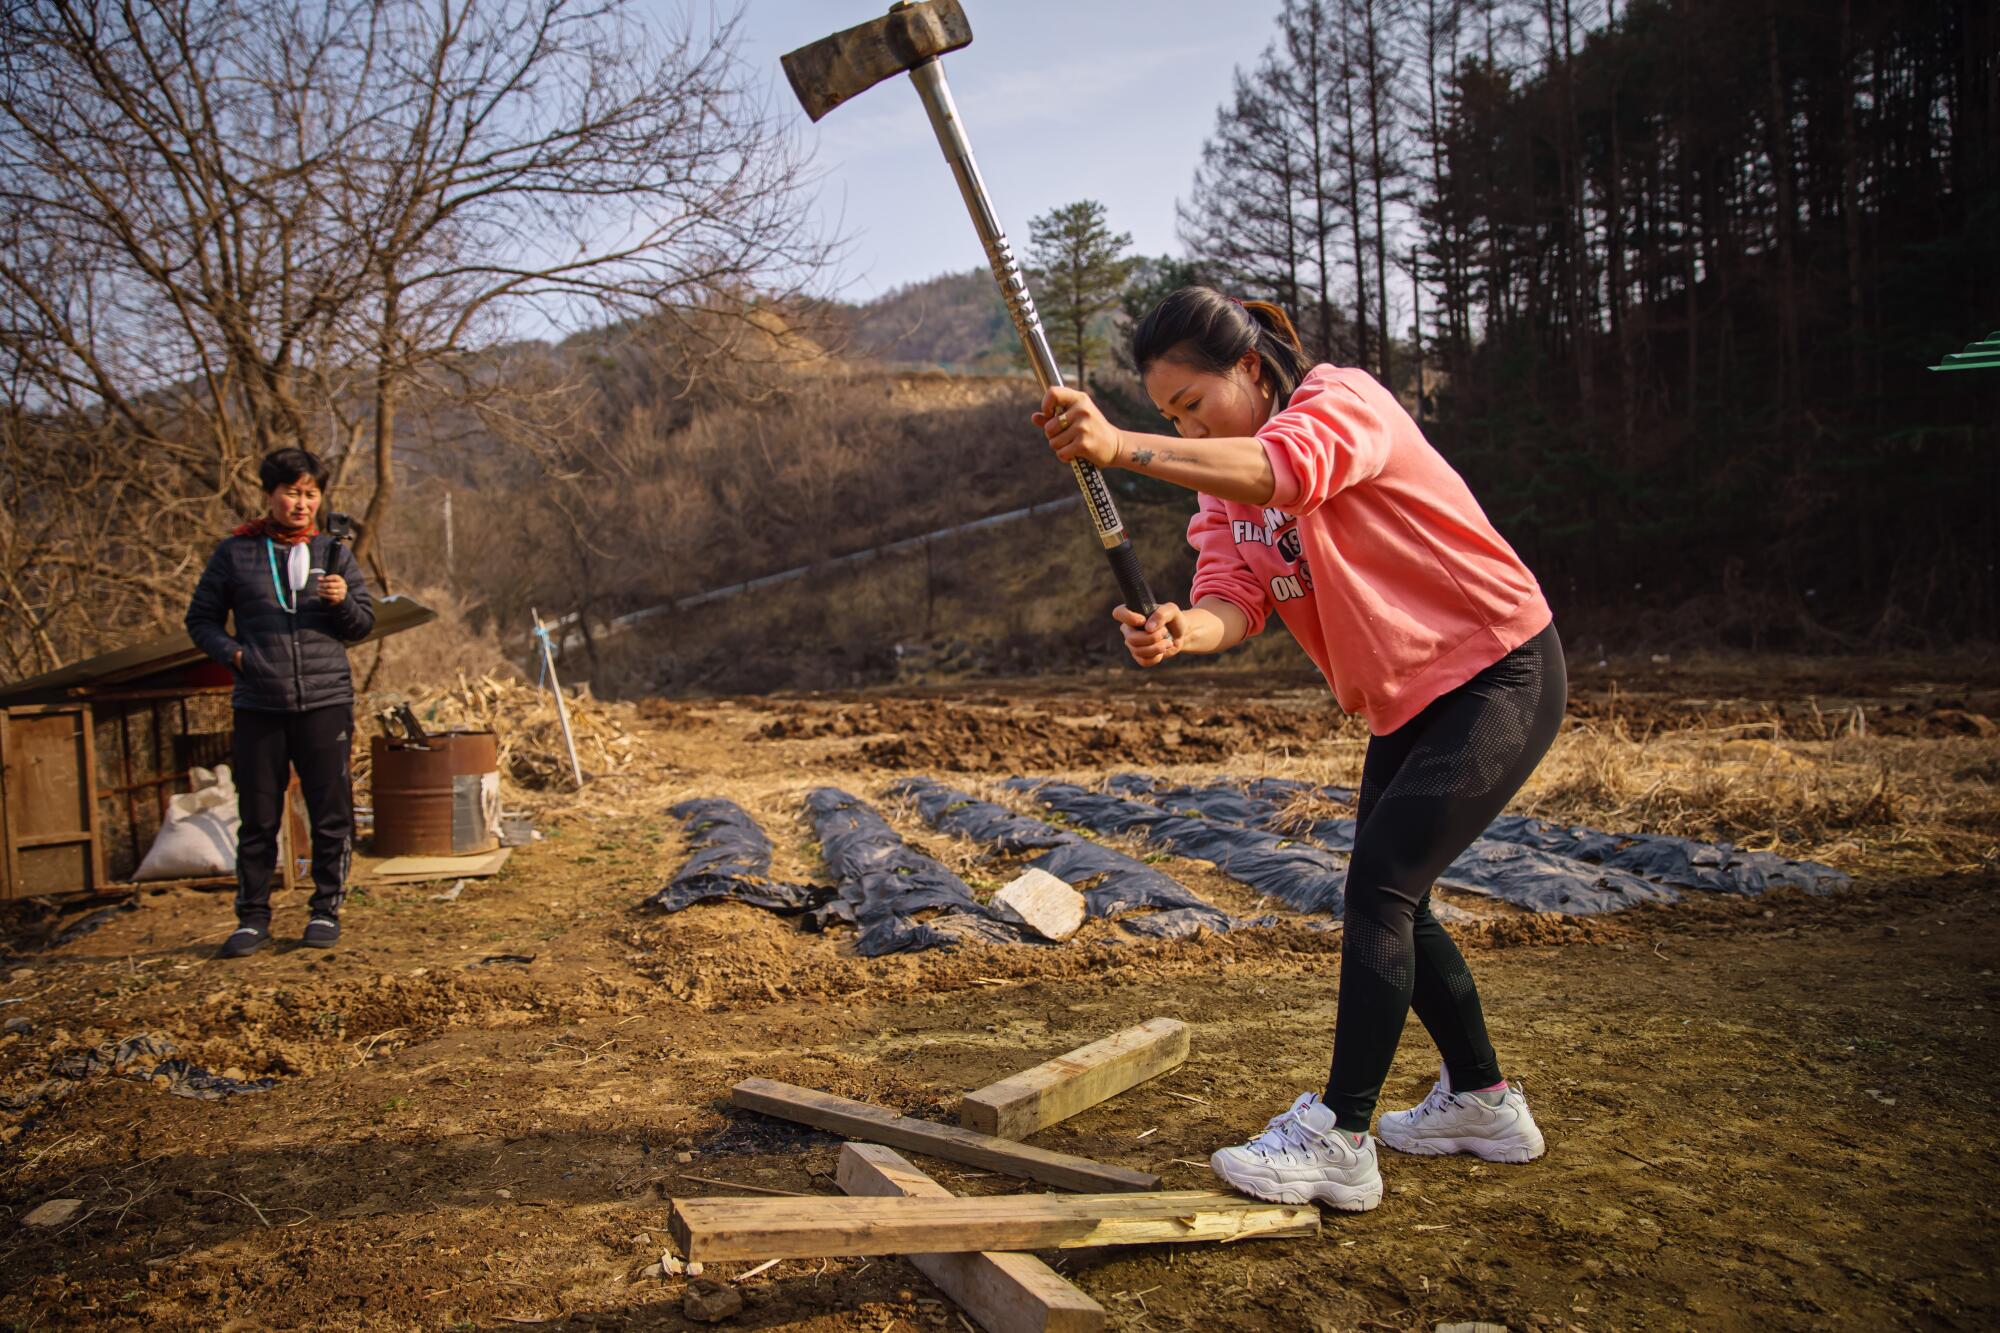 A woman chops firewood in front of a camera